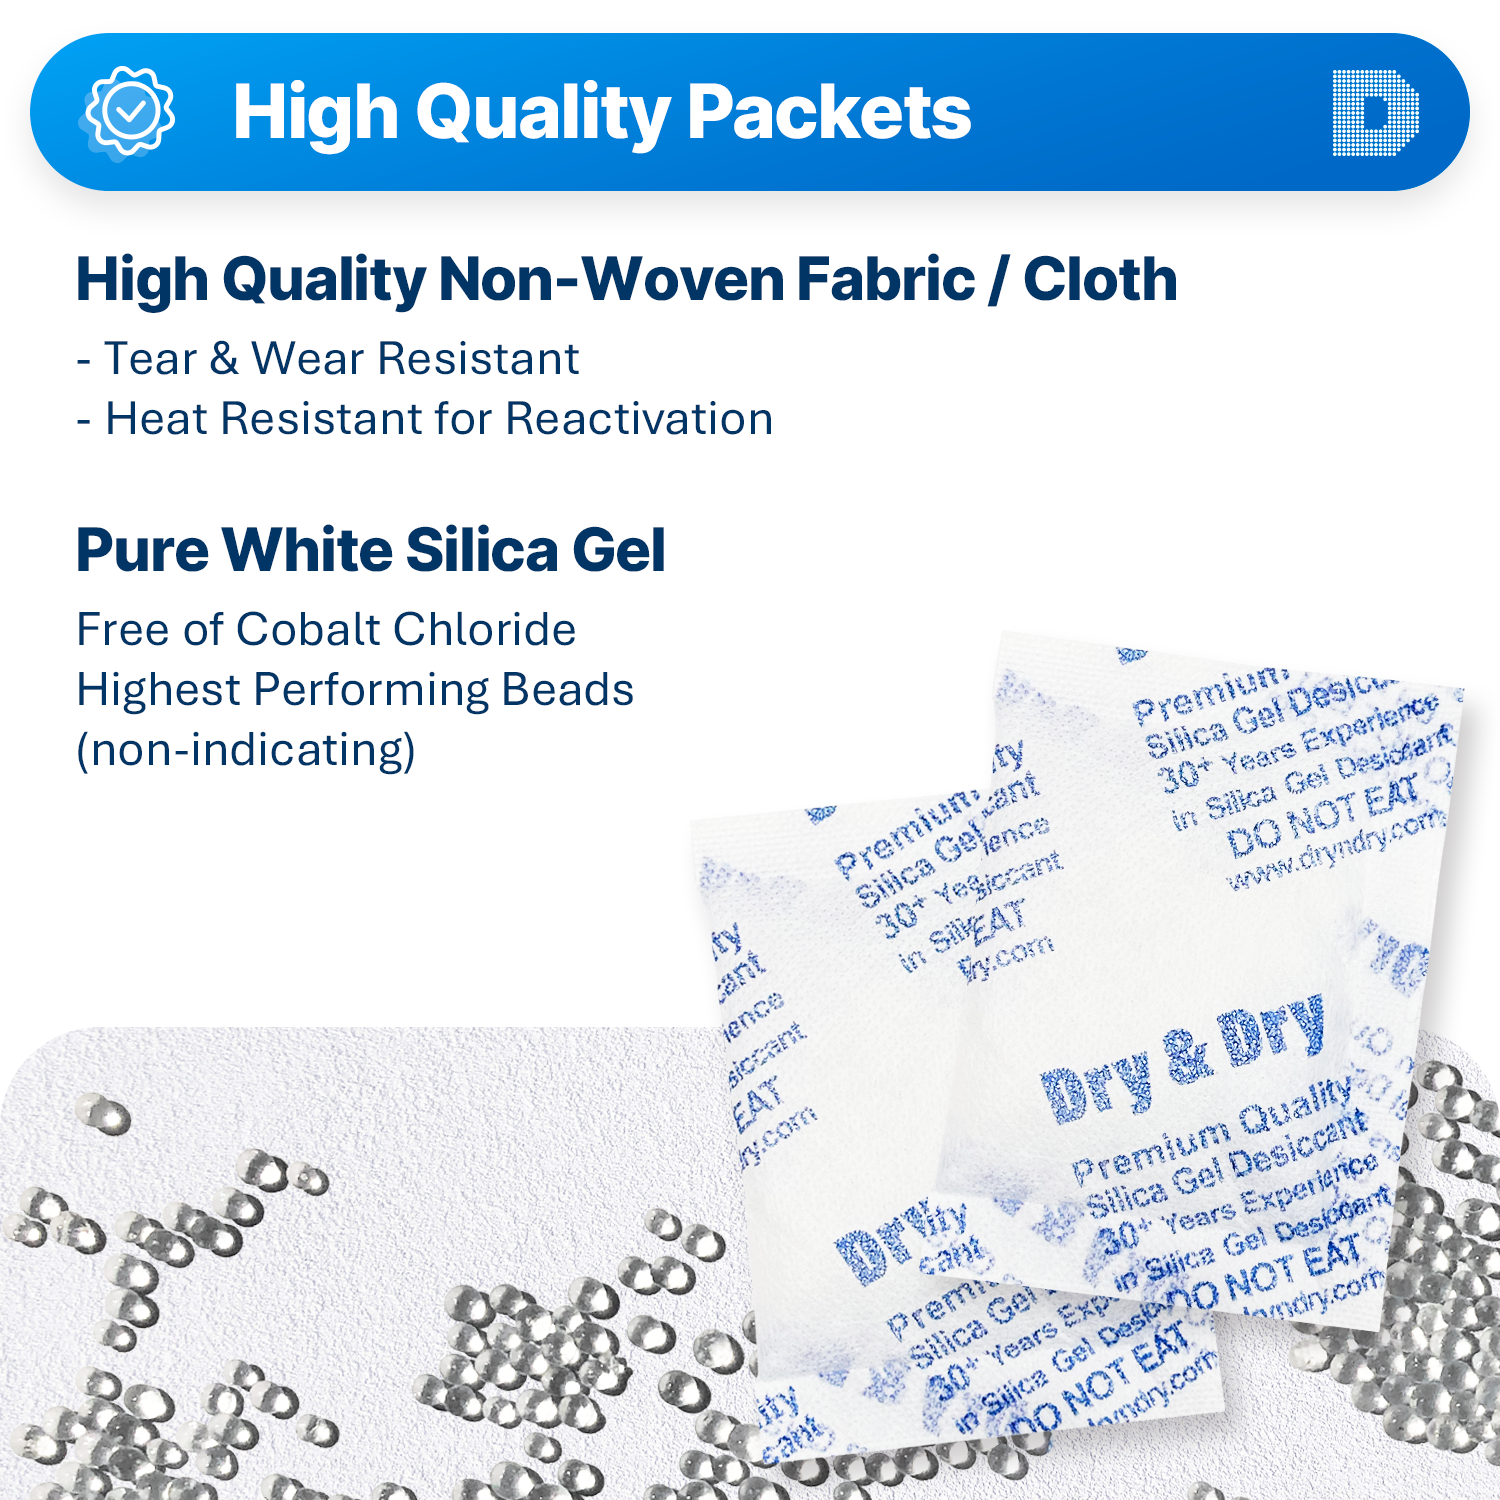 20 gram [800 Packets] "Dry & Dry" Premium Silica Gel Desiccant Packets - Rechargeable Non-Woven Fabric (Cloth)